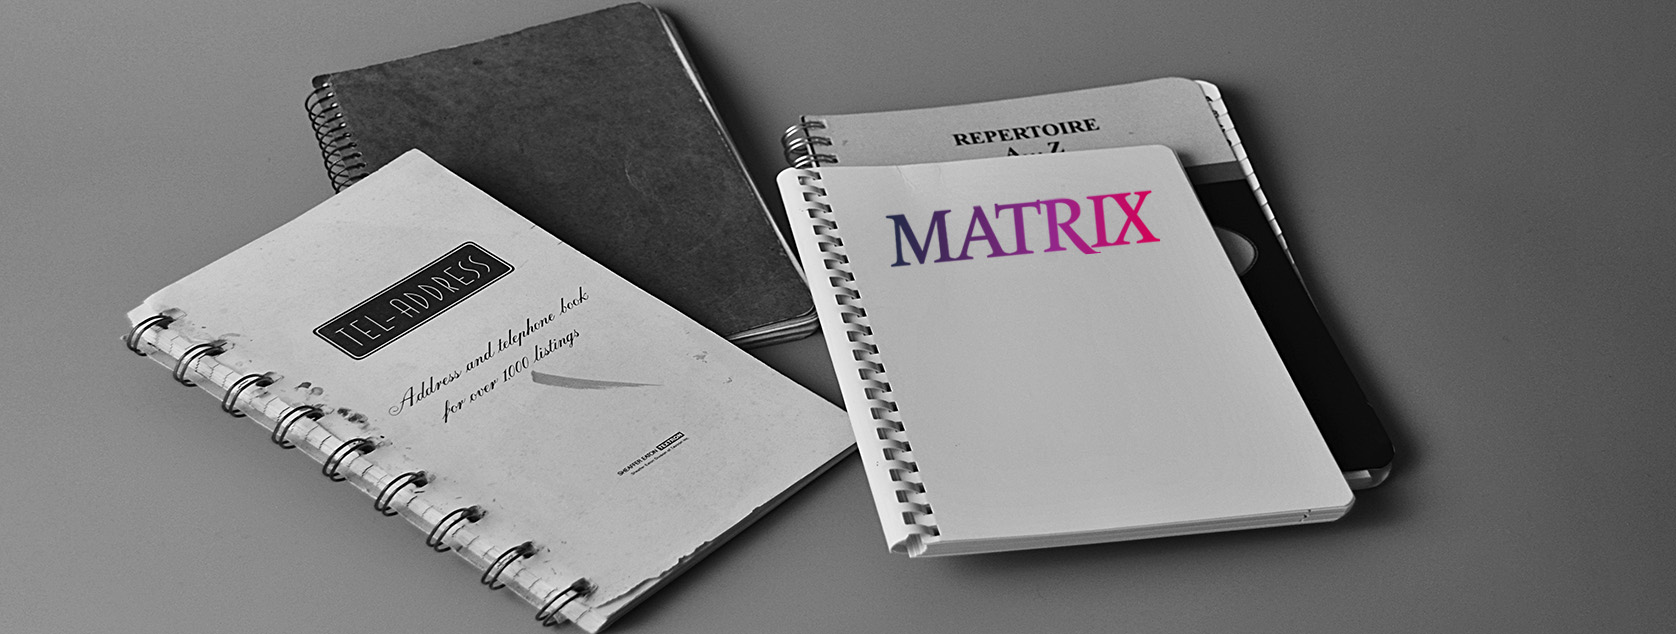 Black and white image of a spiral notepad, repertoire, and address book with the words MATRIX on the cover used for the PEOPLE search page